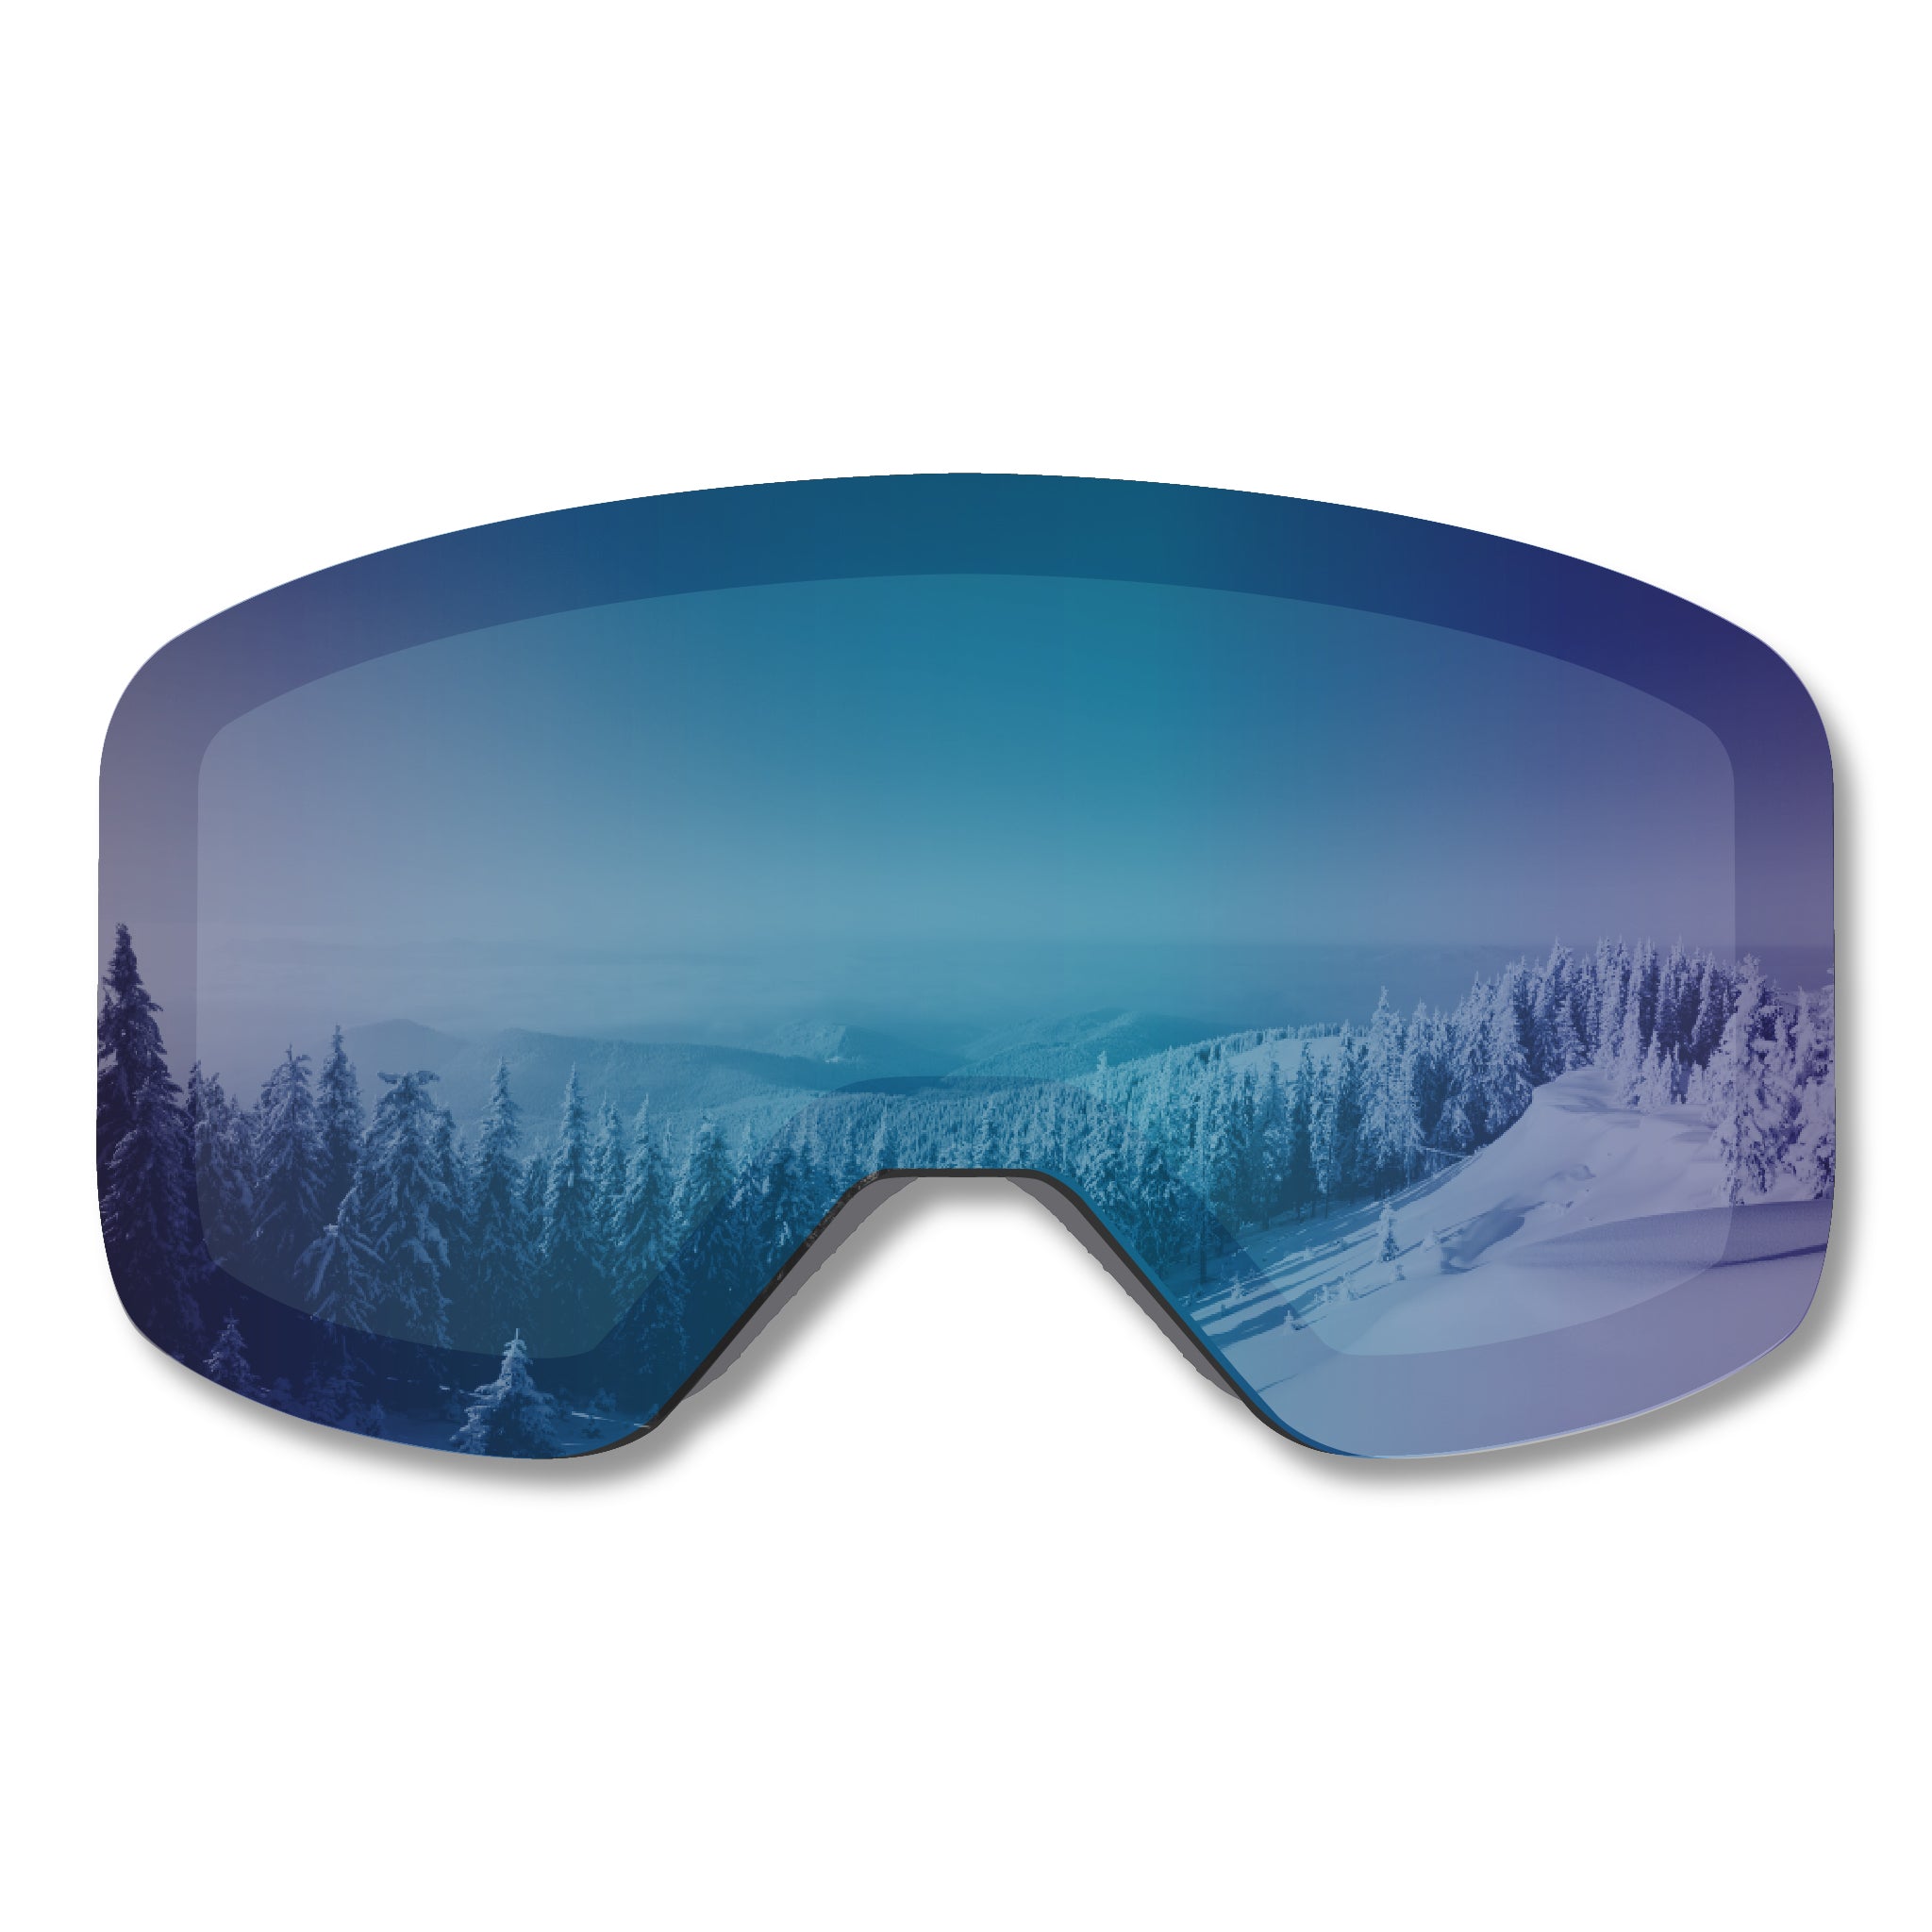 Product shot of the STAGE Propnetic Violet Revo Lens for the STAGE Propnetic Magnetic Ski Goggle.